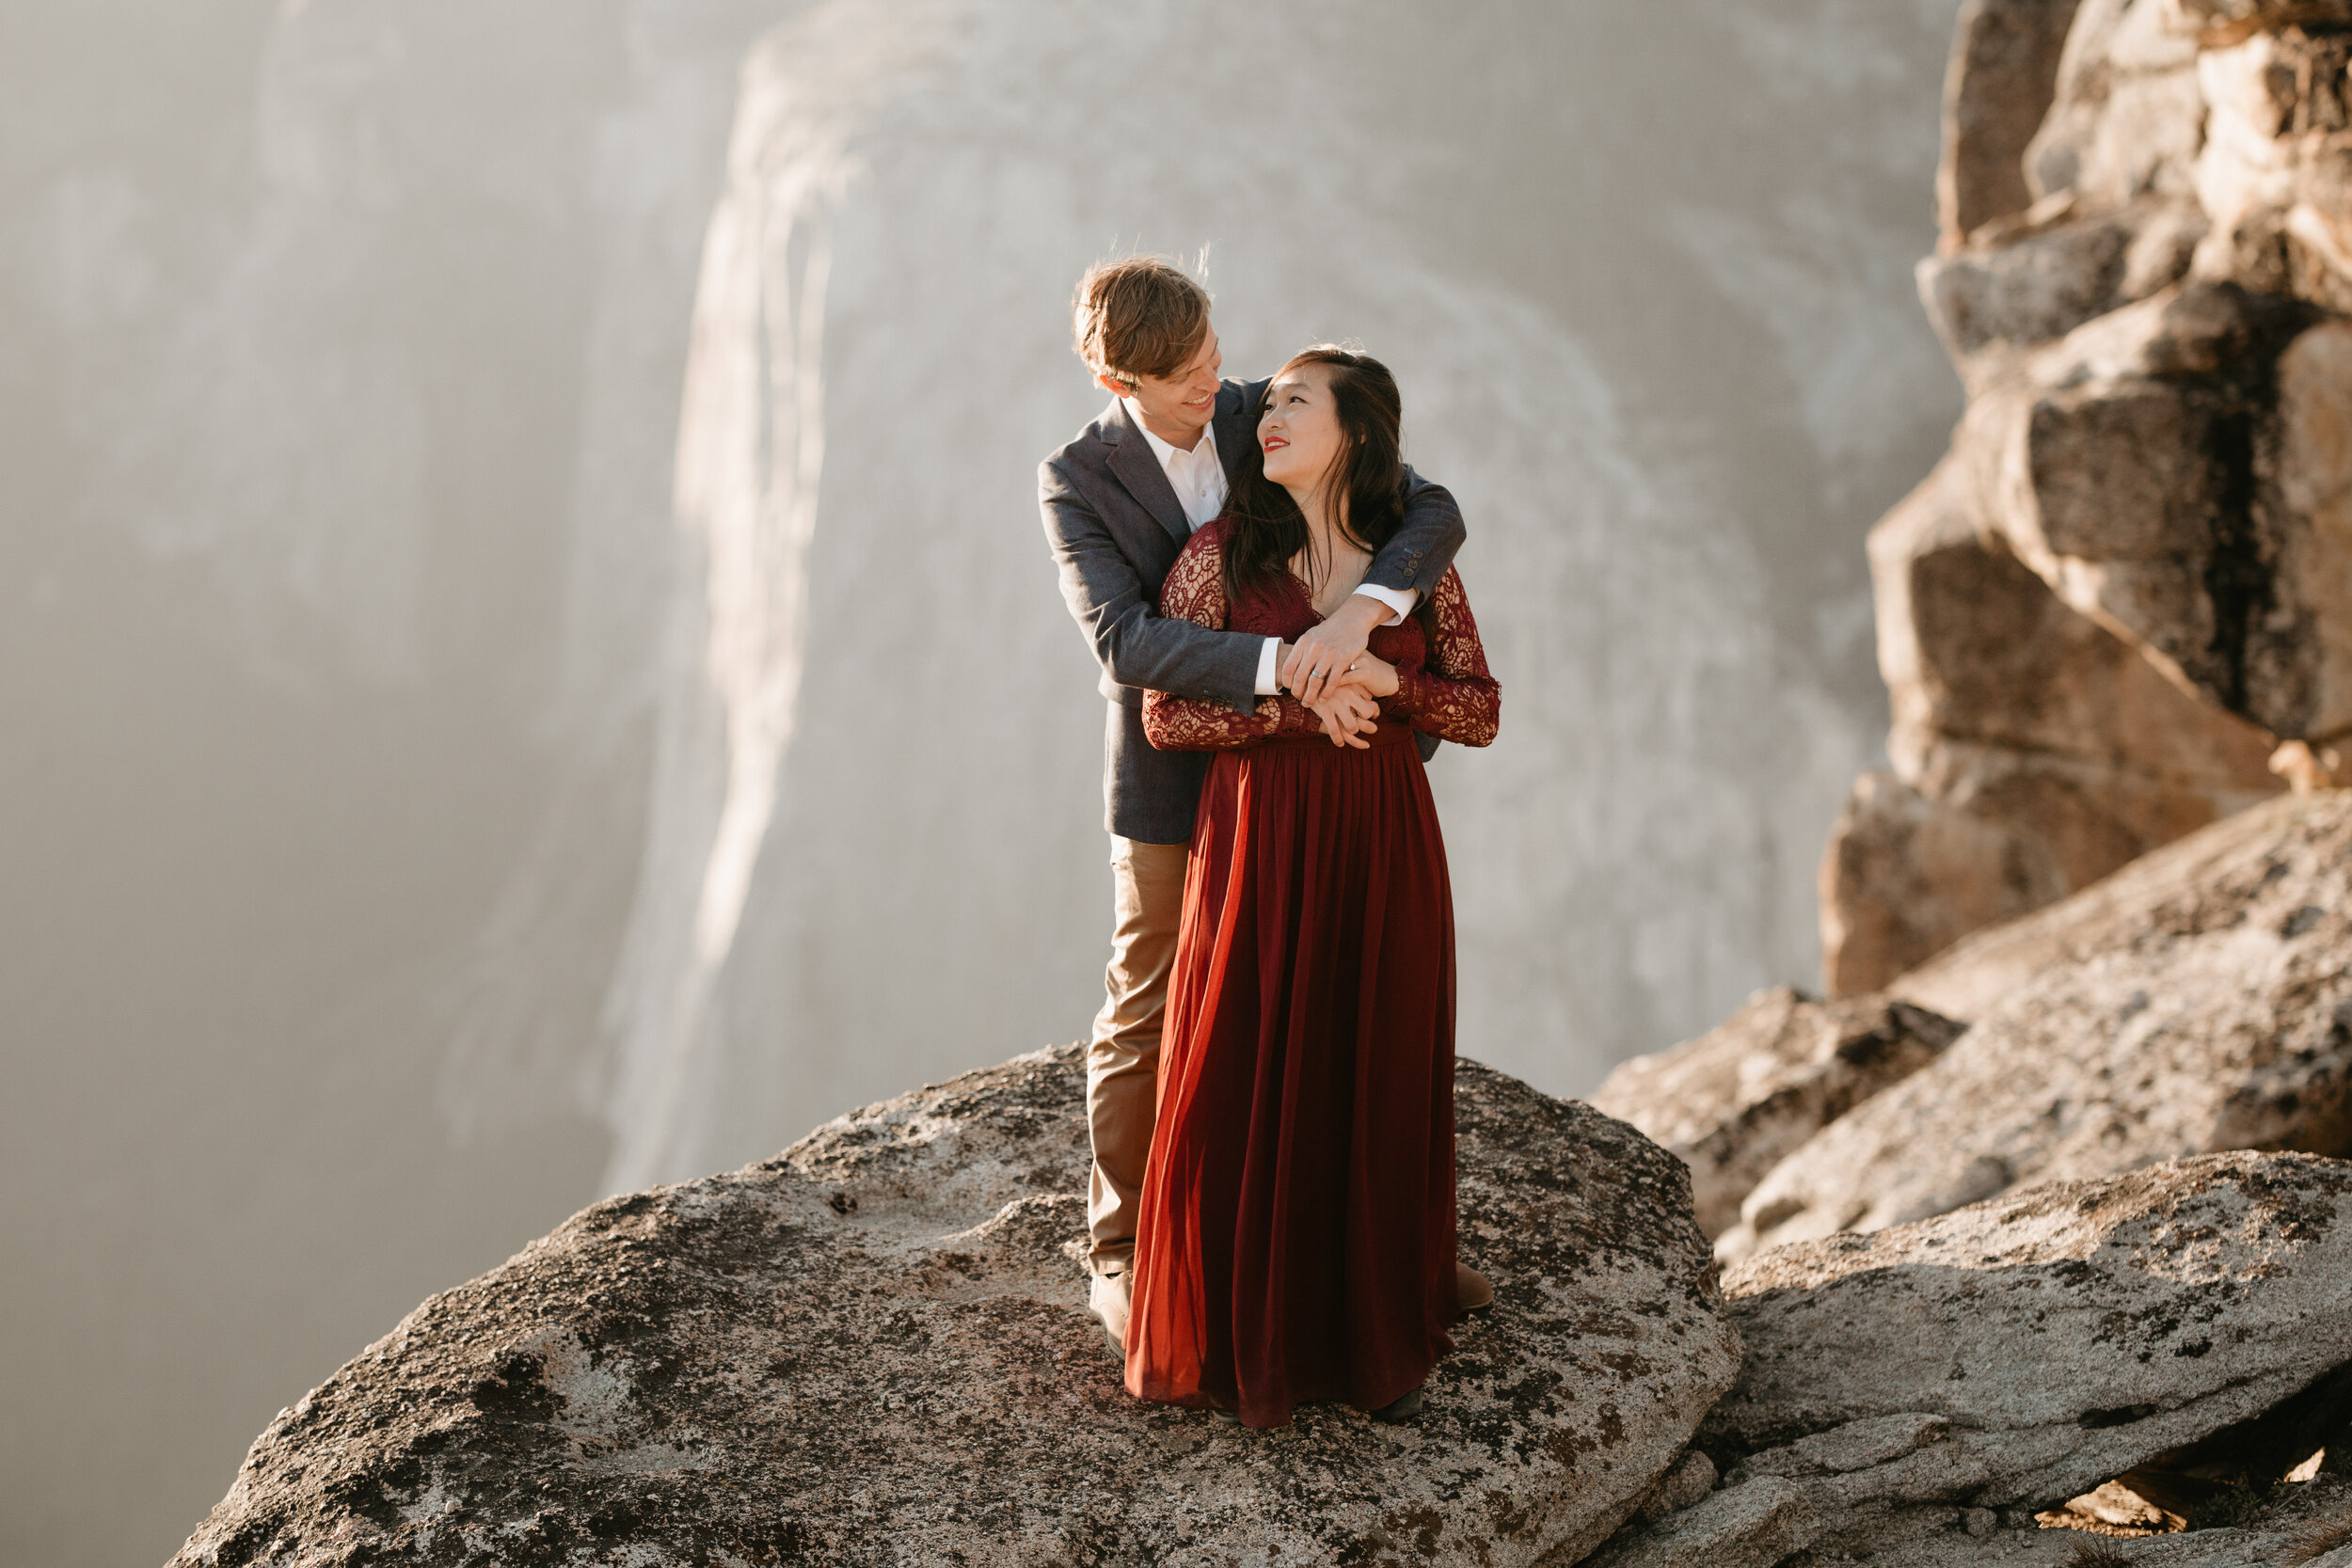 yosemite-national-park-couples-session-at-taft-point-and-yosemite-valley-yosemite-elopement-photographer-nicole-daacke-photography-137.jpg